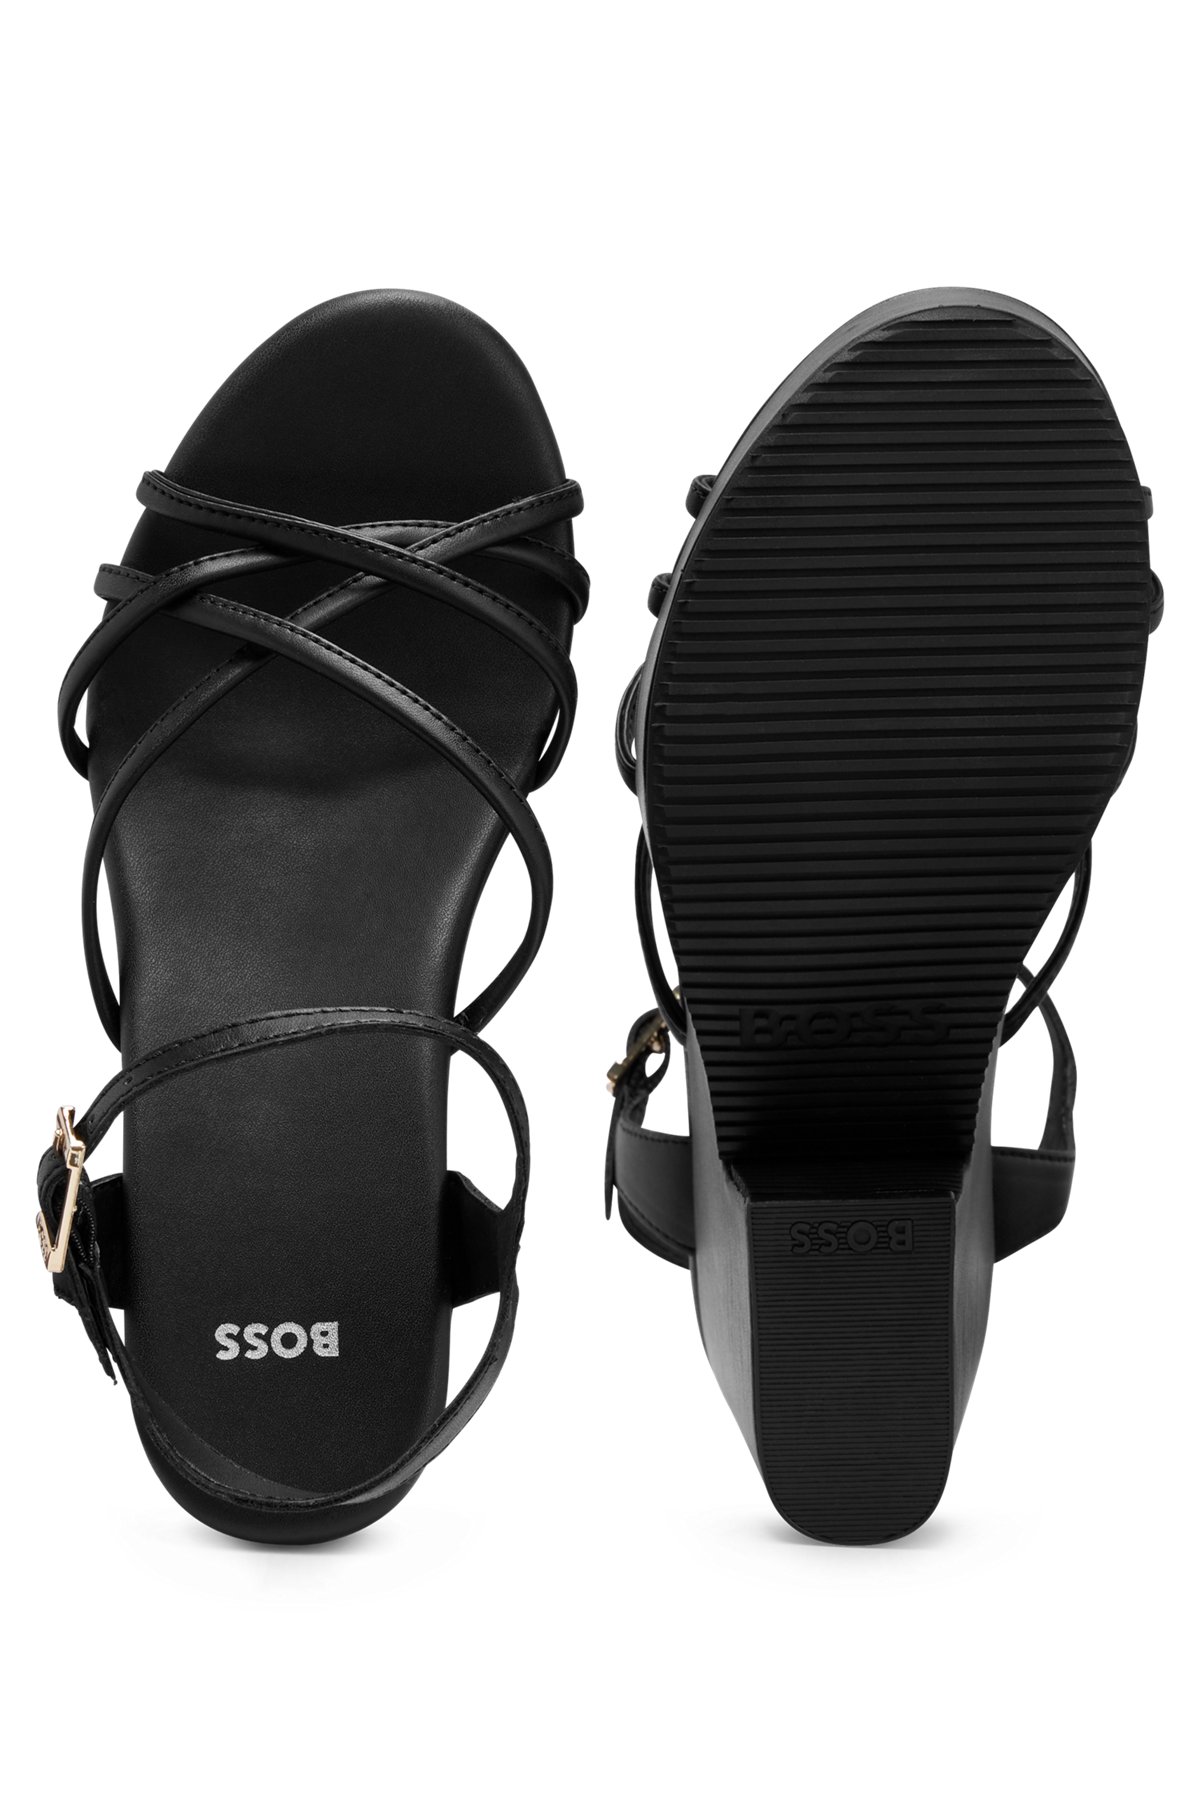 BOSS - Platform sandals in soft leather with branded buckle